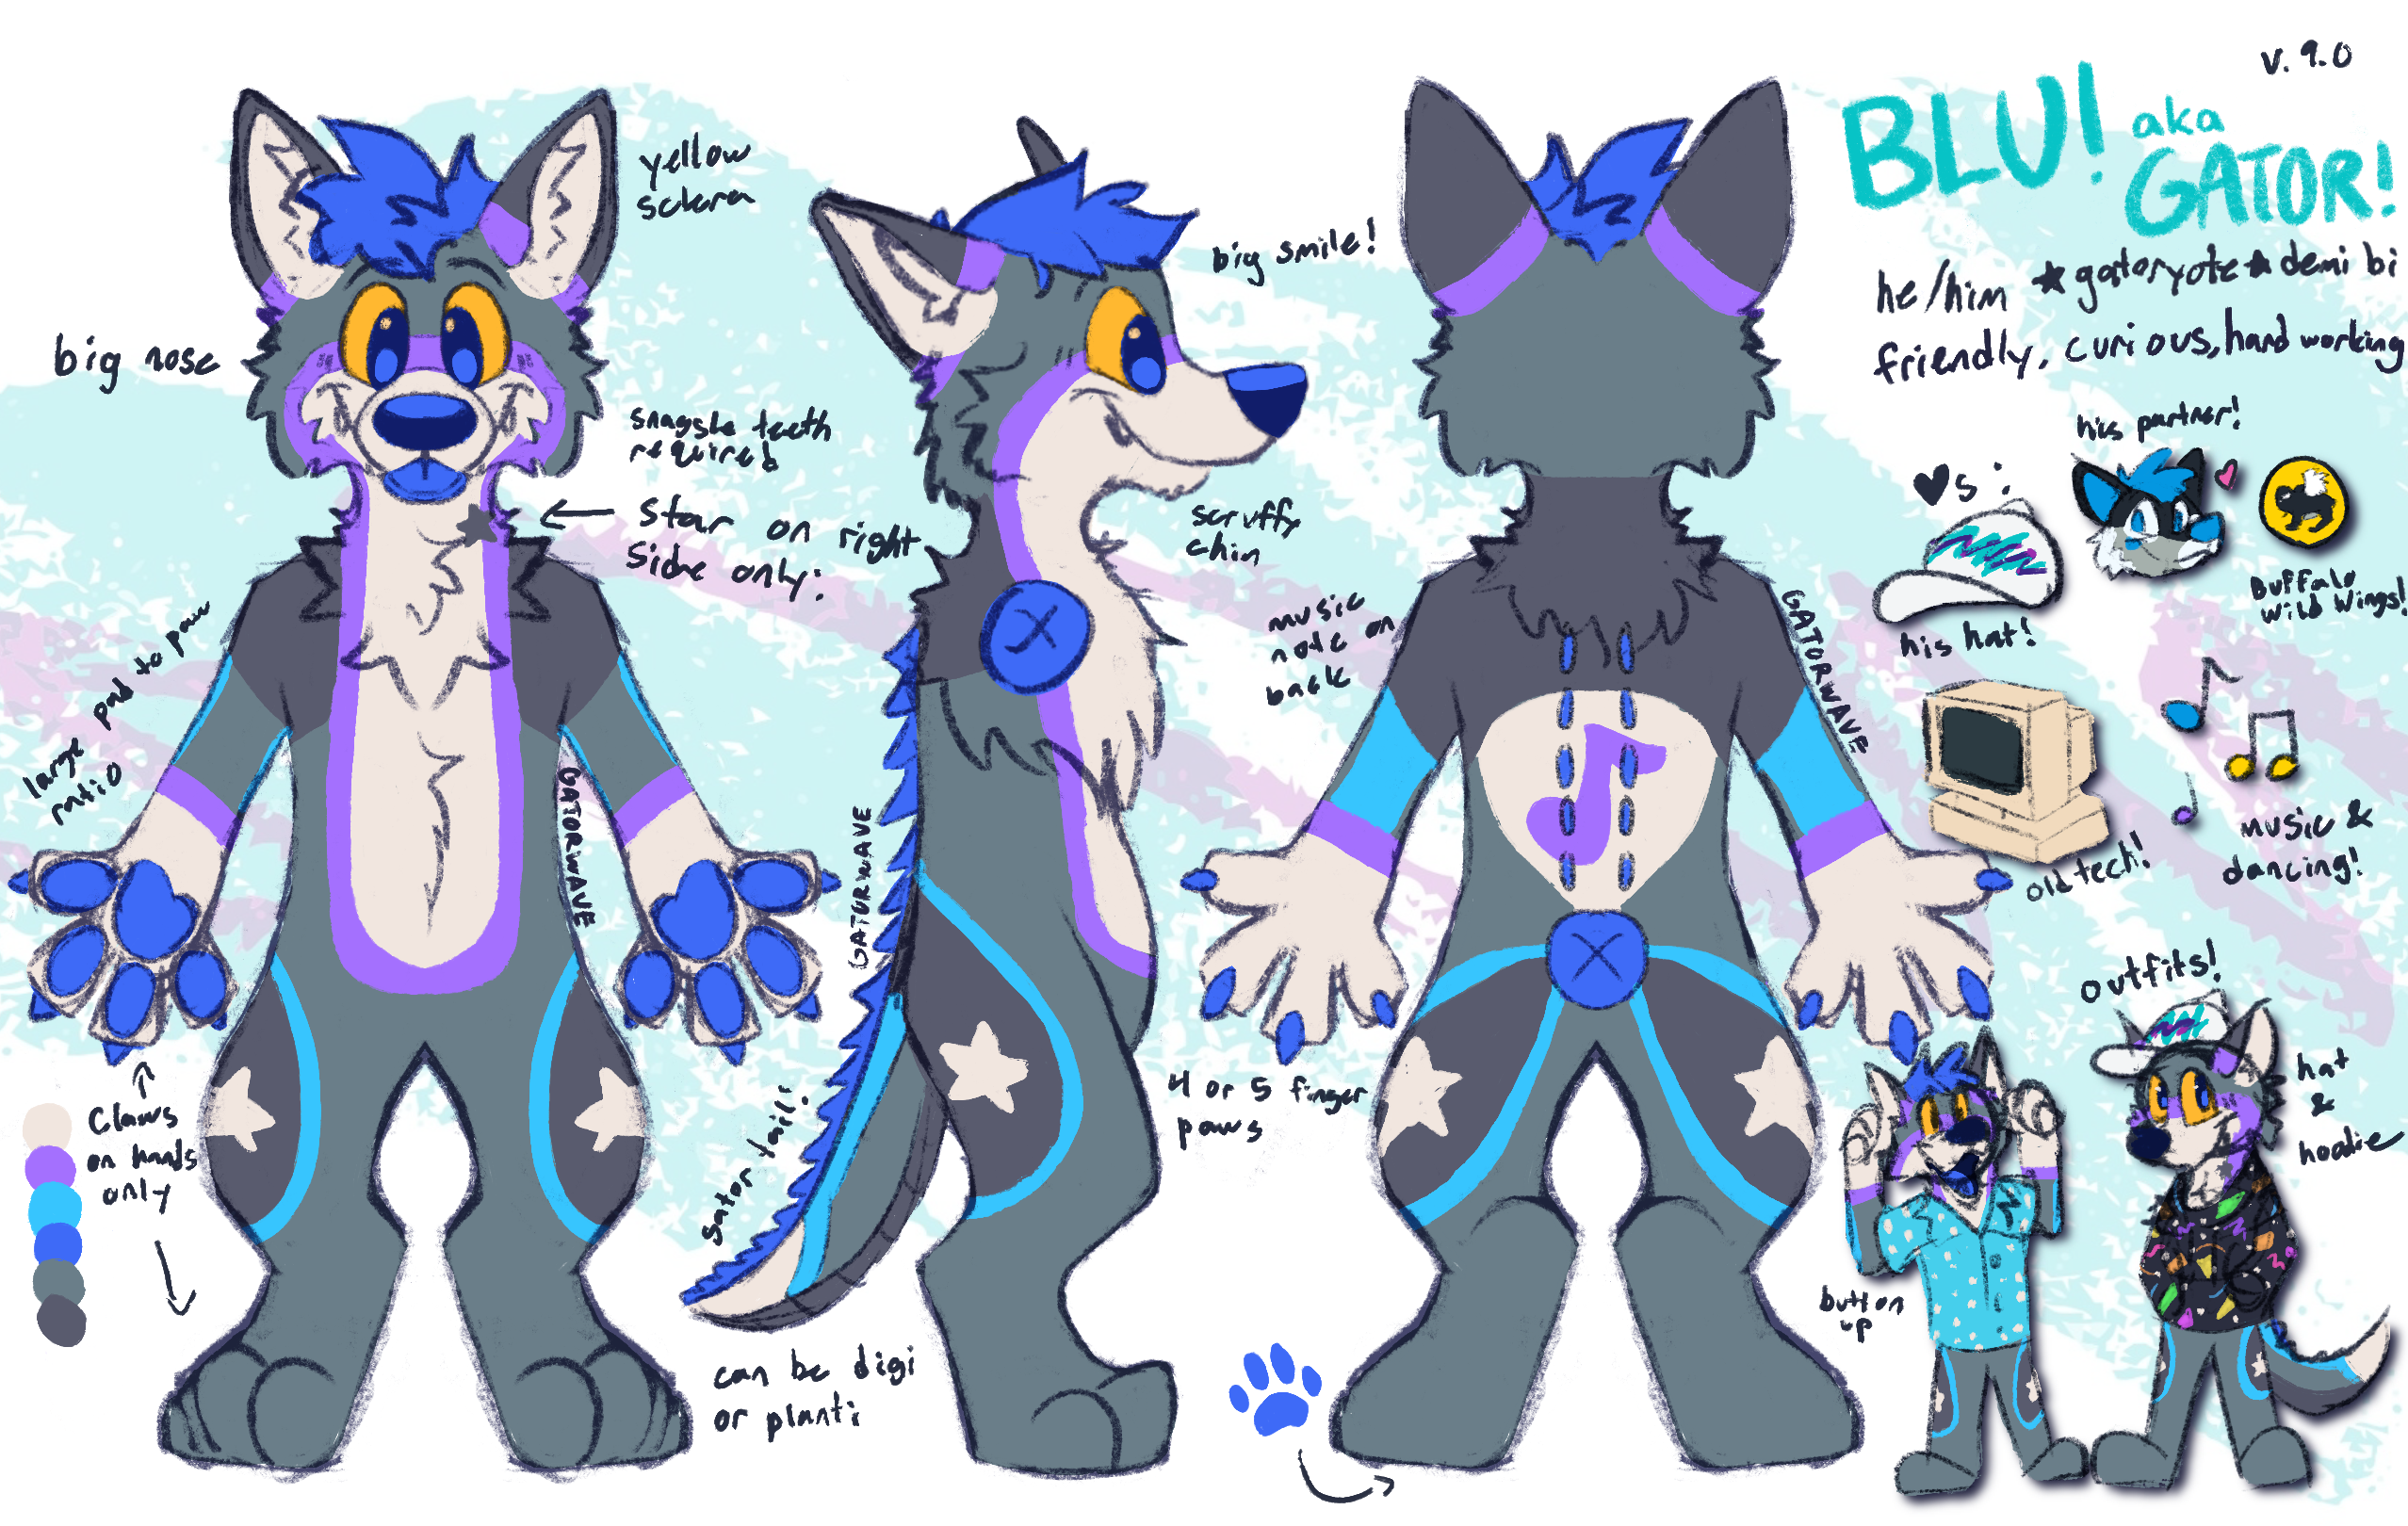 a 3-pose reference sheet of blu. he is standing with his arms out in the first, standing and looking to the right in the second, and standing with his arms out away from the camera in the third.